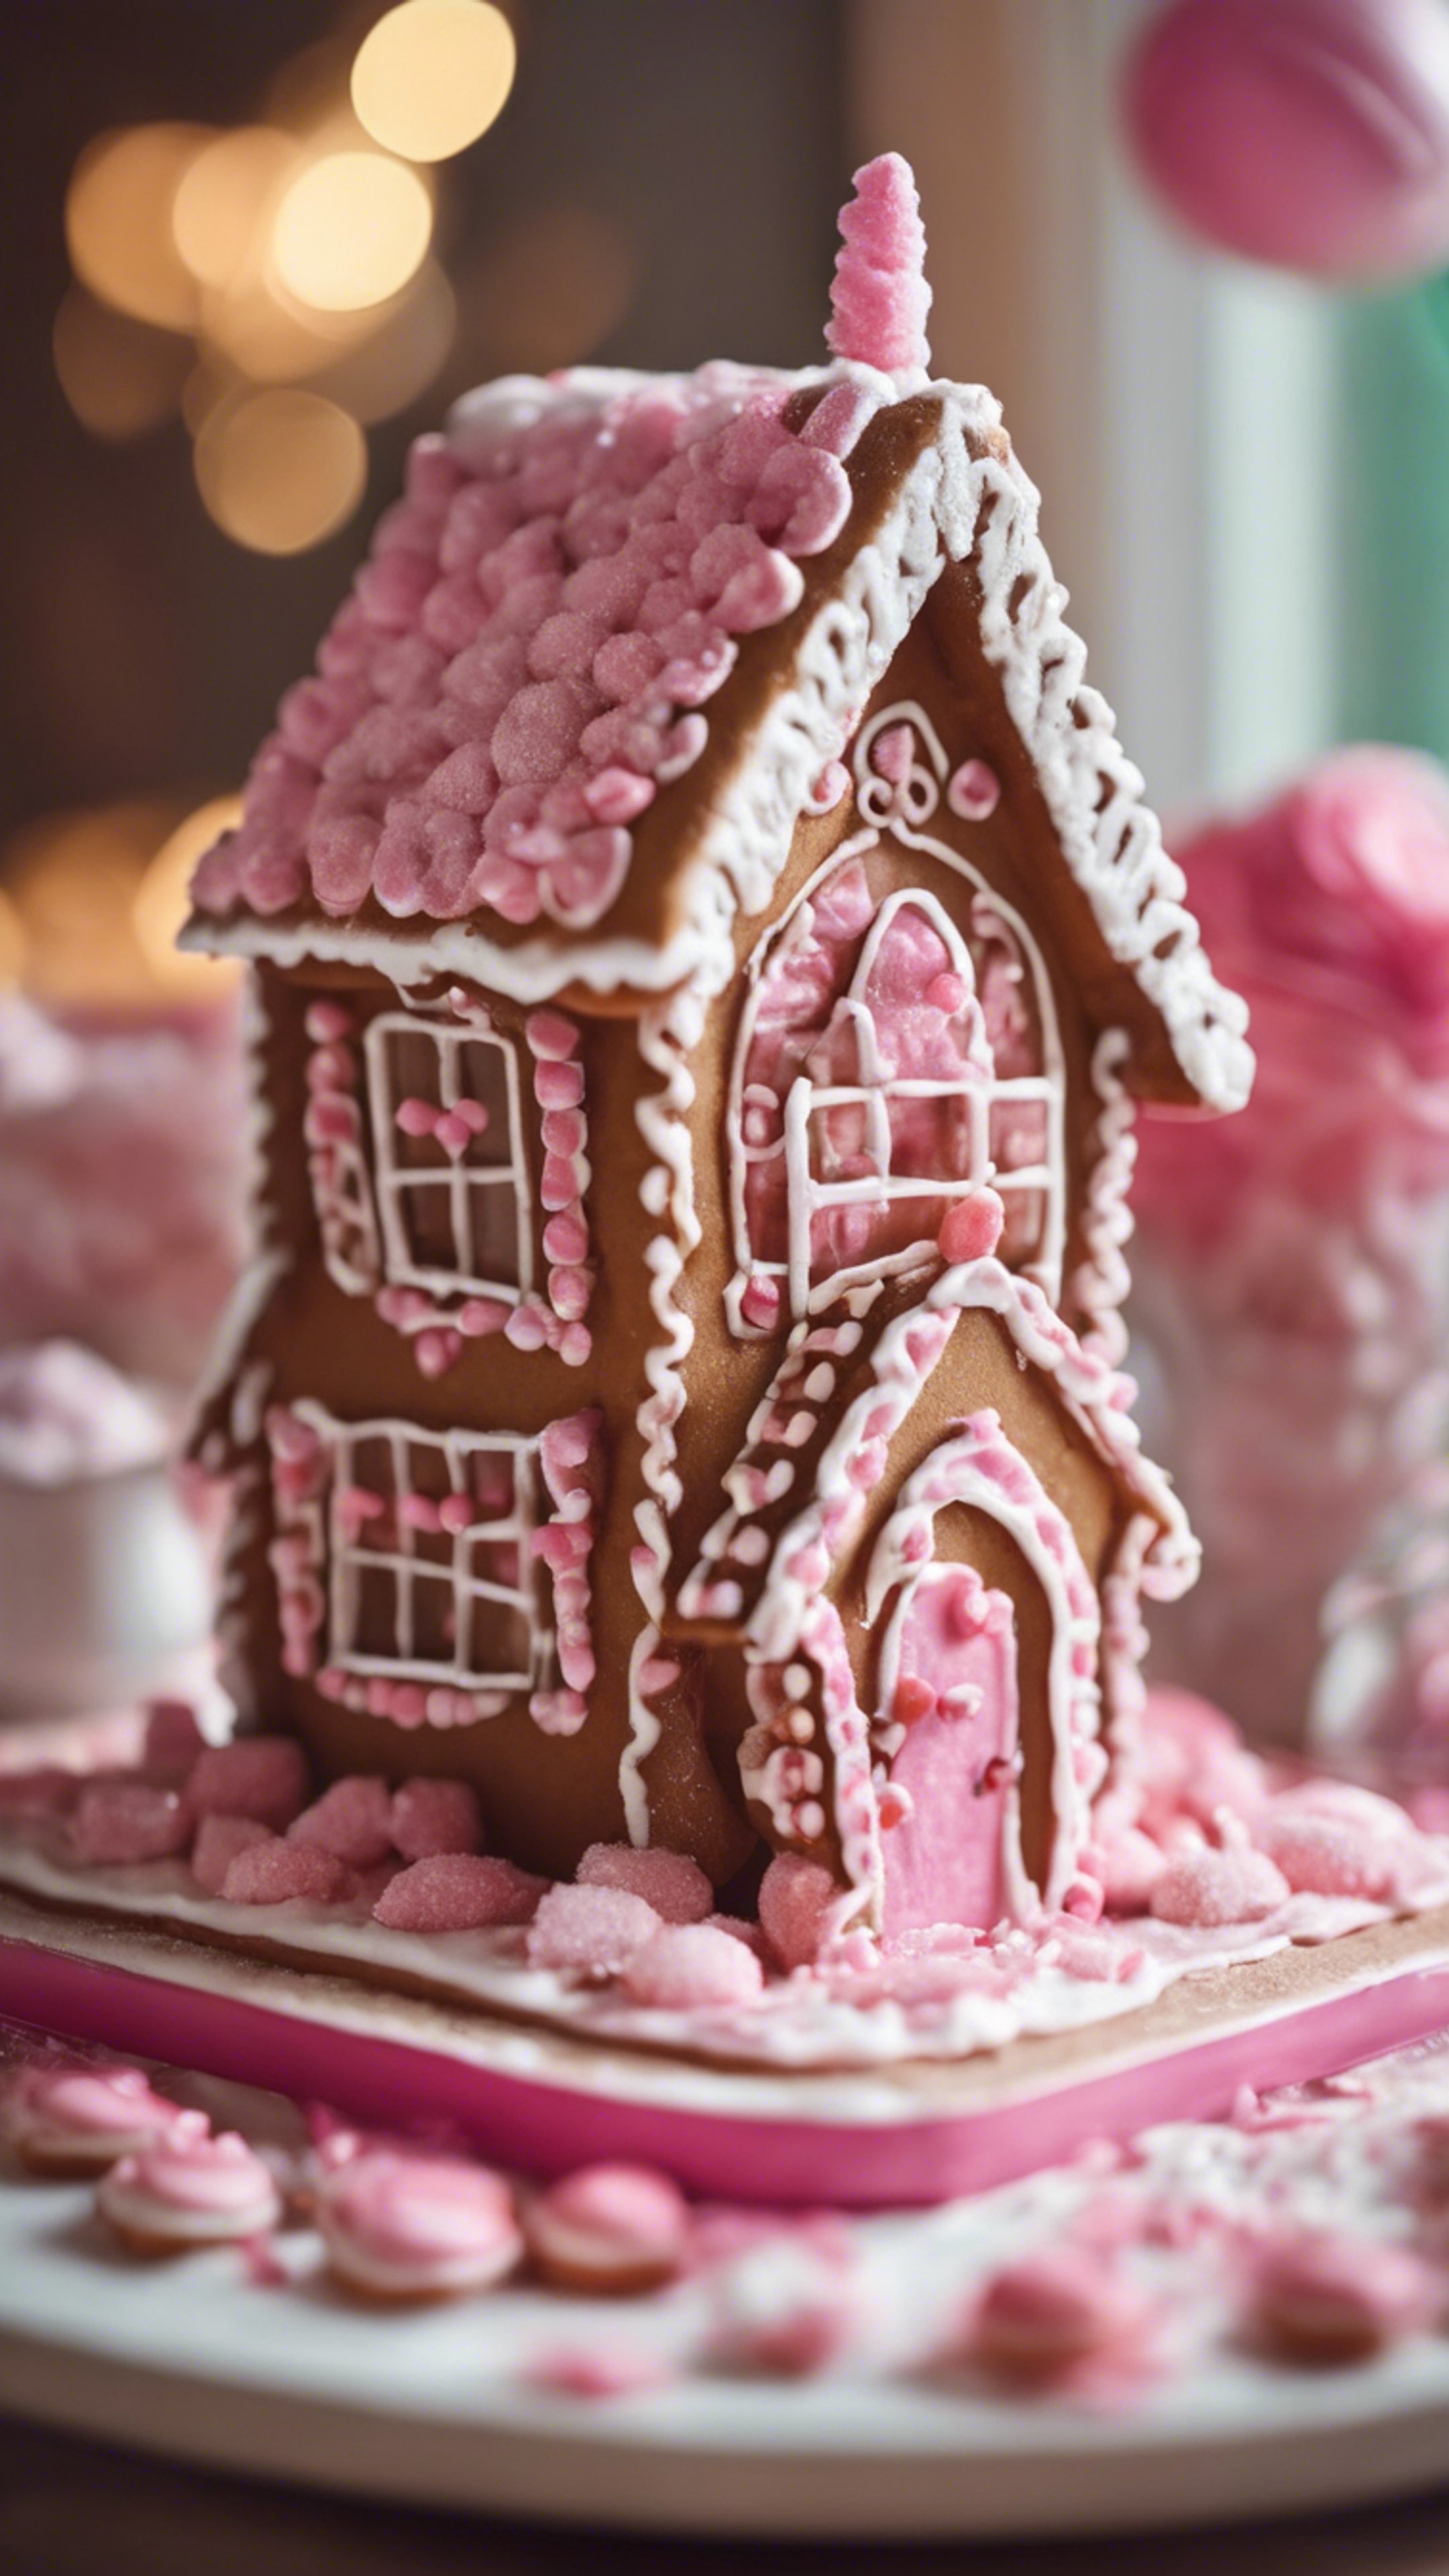 A cute gingerbread house adorned with pink icing and candy. Валлпапер[80166f7992434f38b590]